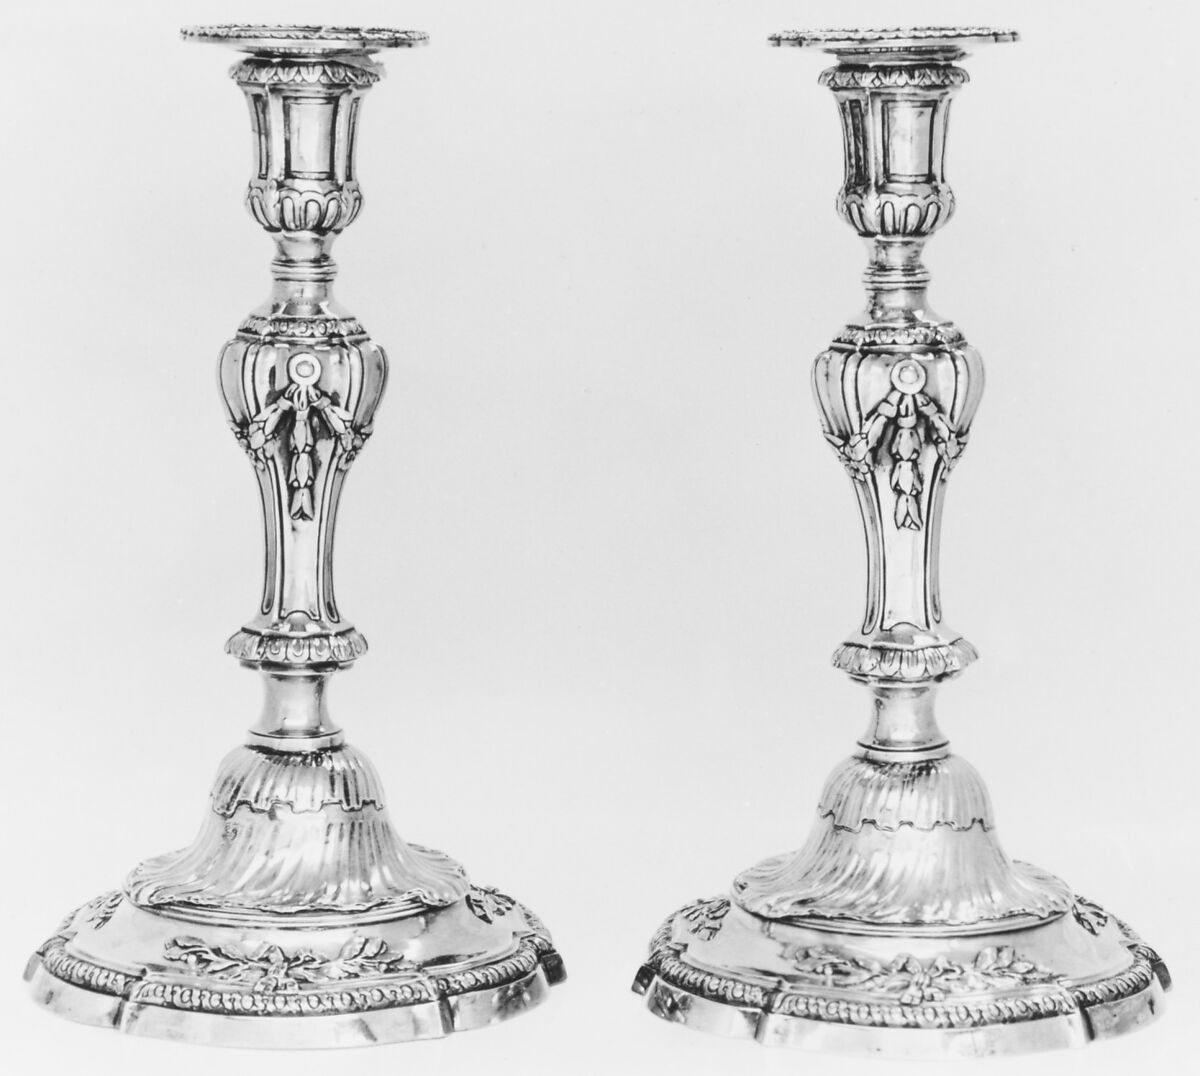 Pair of candlesticks, Jacques-Pierre Marteau (apprenticed 1740, master 1757, died 1779), Silver, French, Paris 